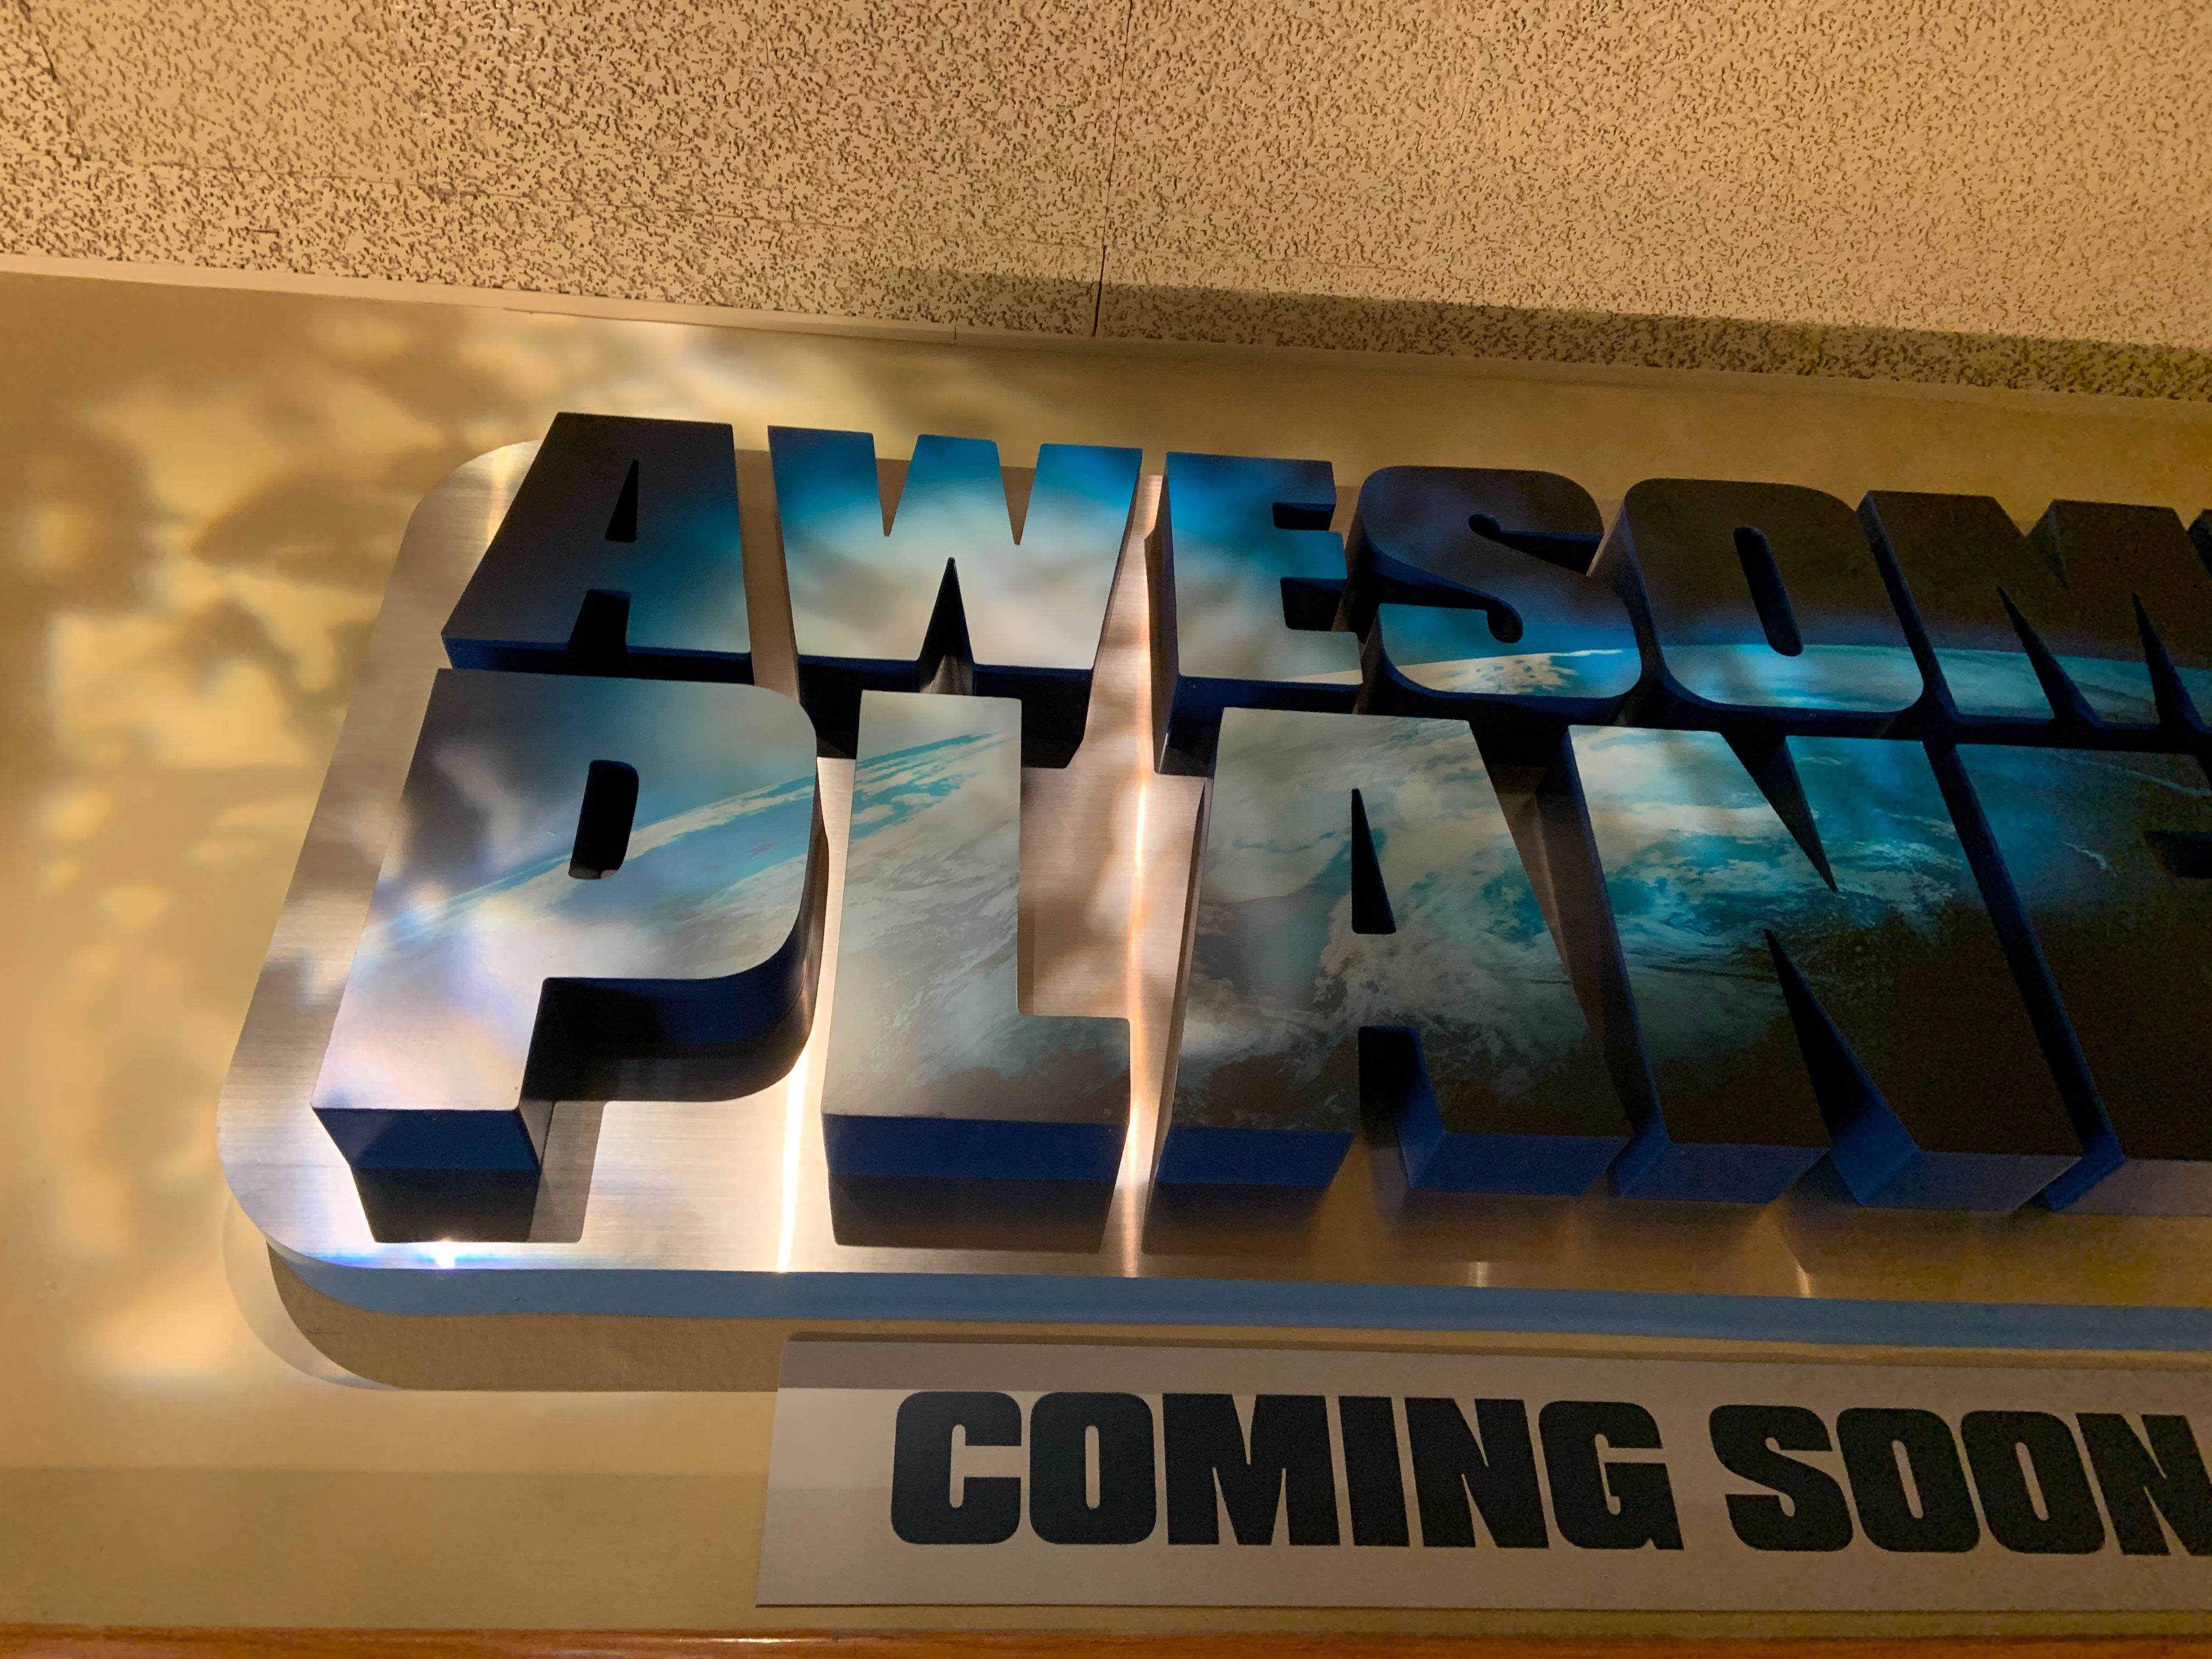 awesome planet sign epcot dec 2019 2